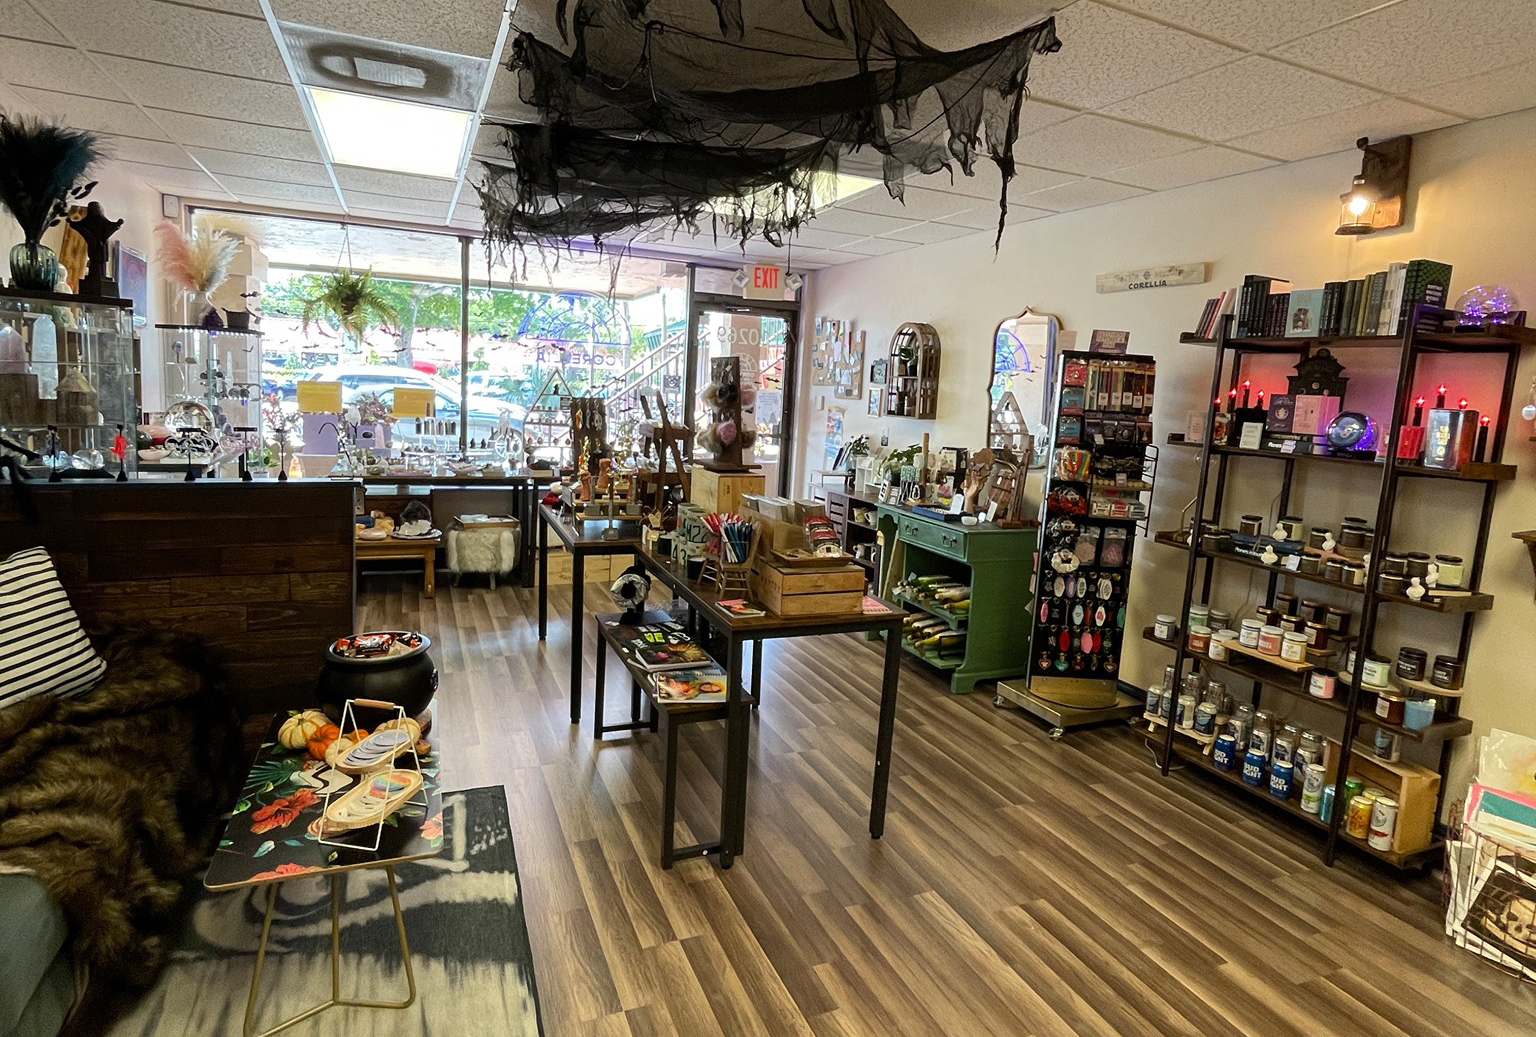 New 'Witchy Wares’ Gift Shop in Coral Springs Offering Classes that Include Tarot Readings